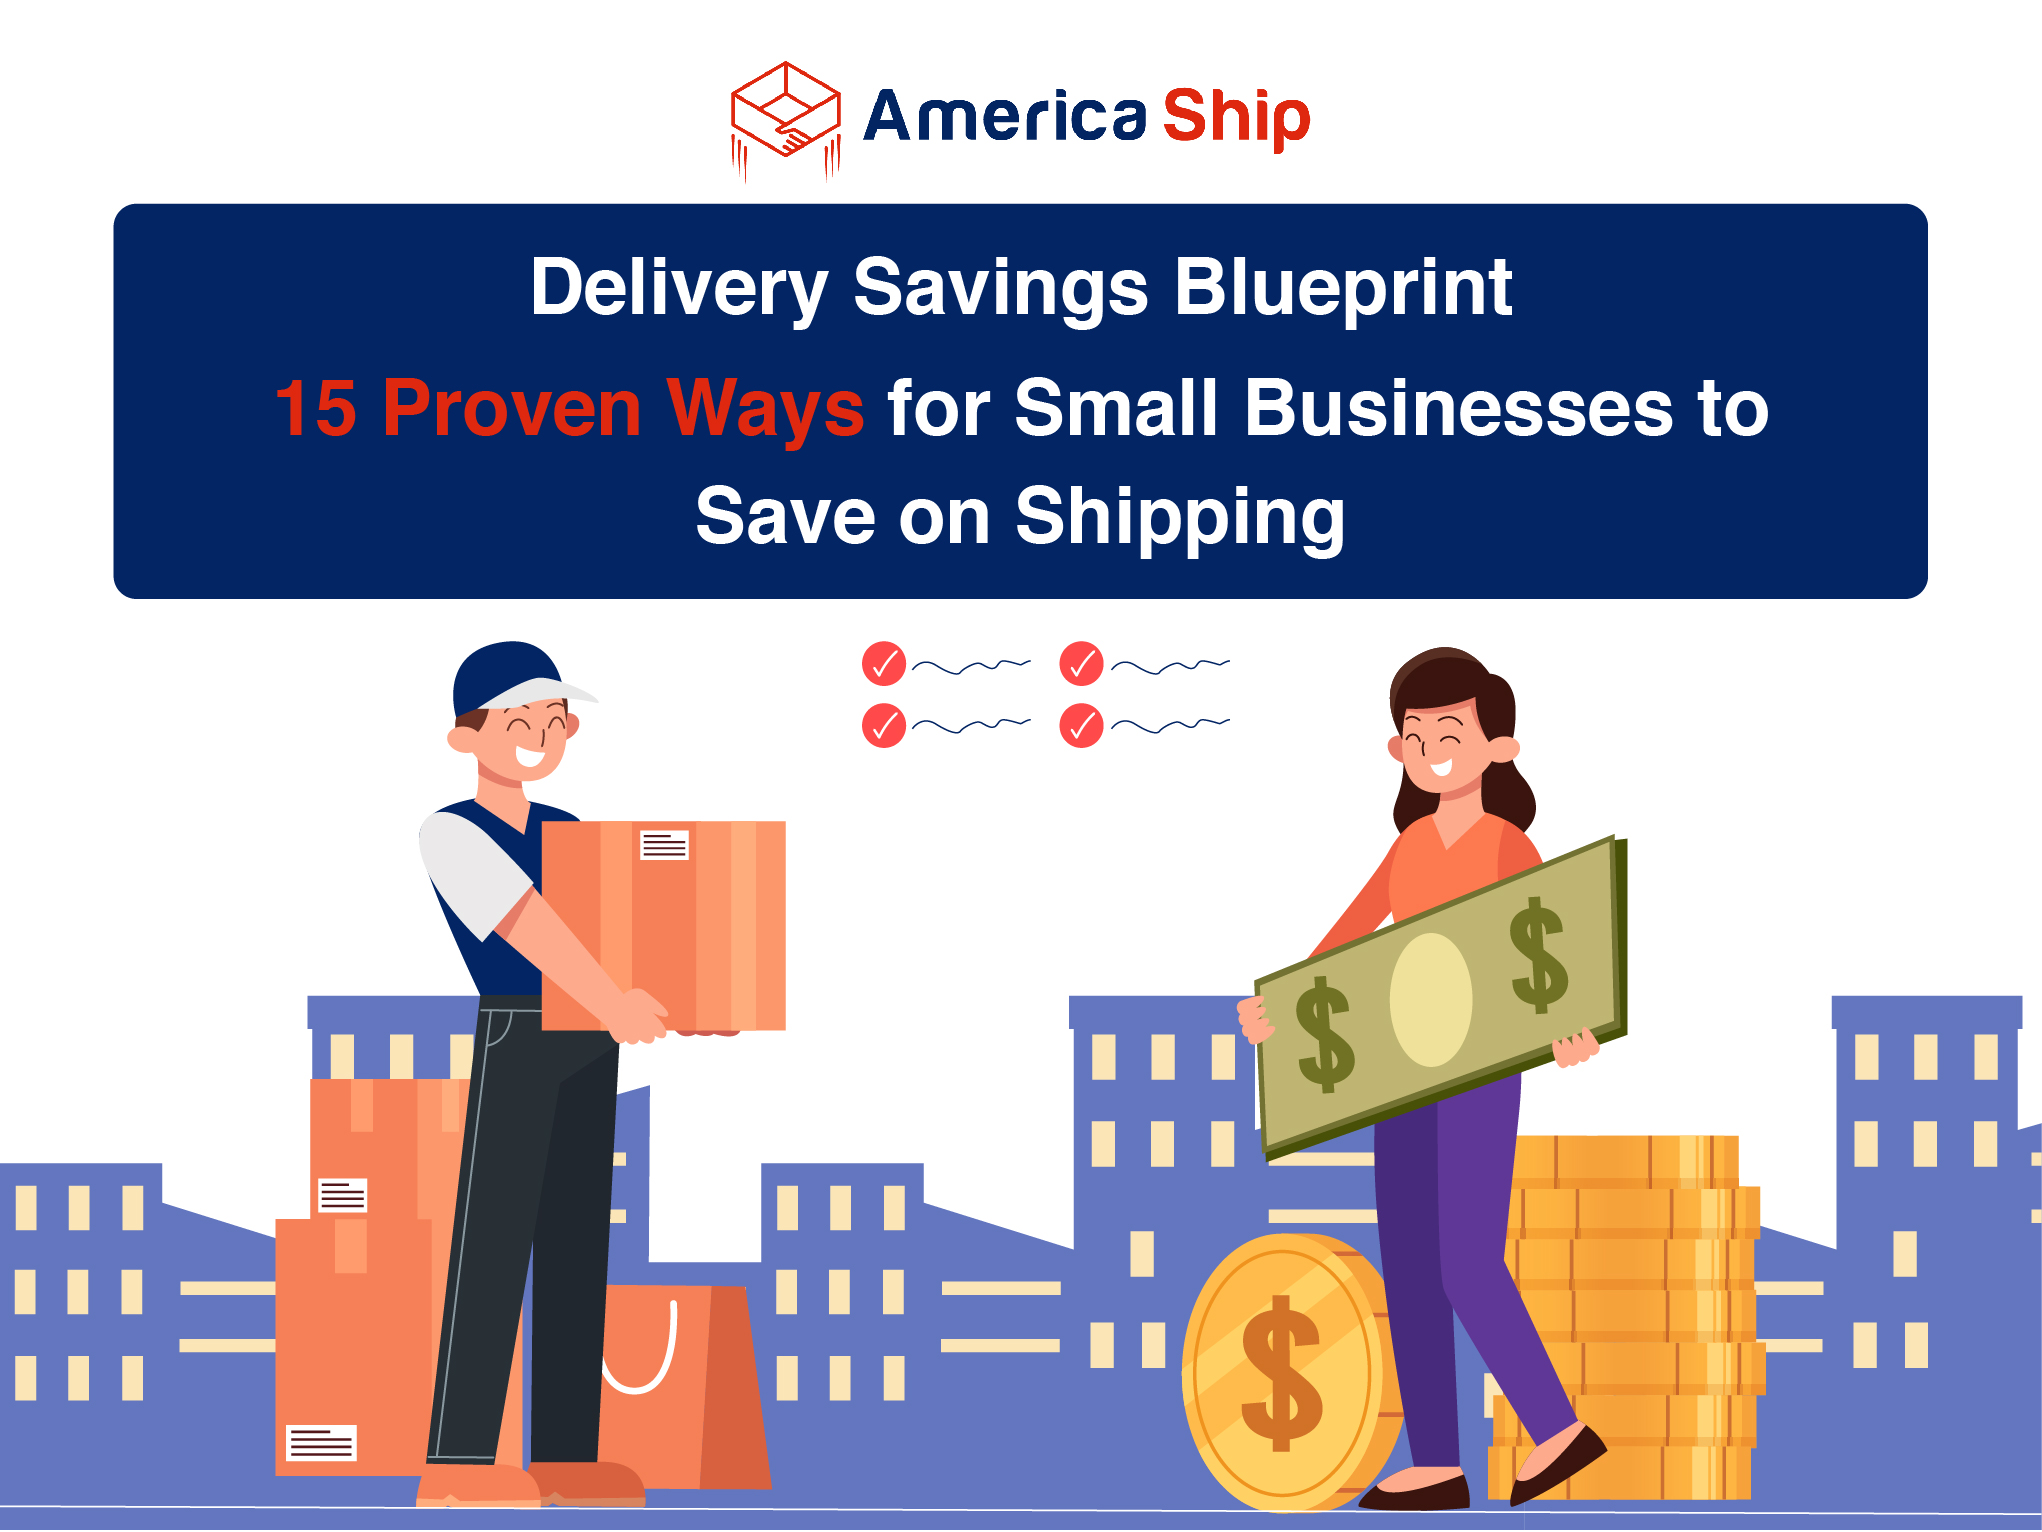 Delivery Savings Blueprint: 15 Proven Ways for Small Businesses to Save on Shipping